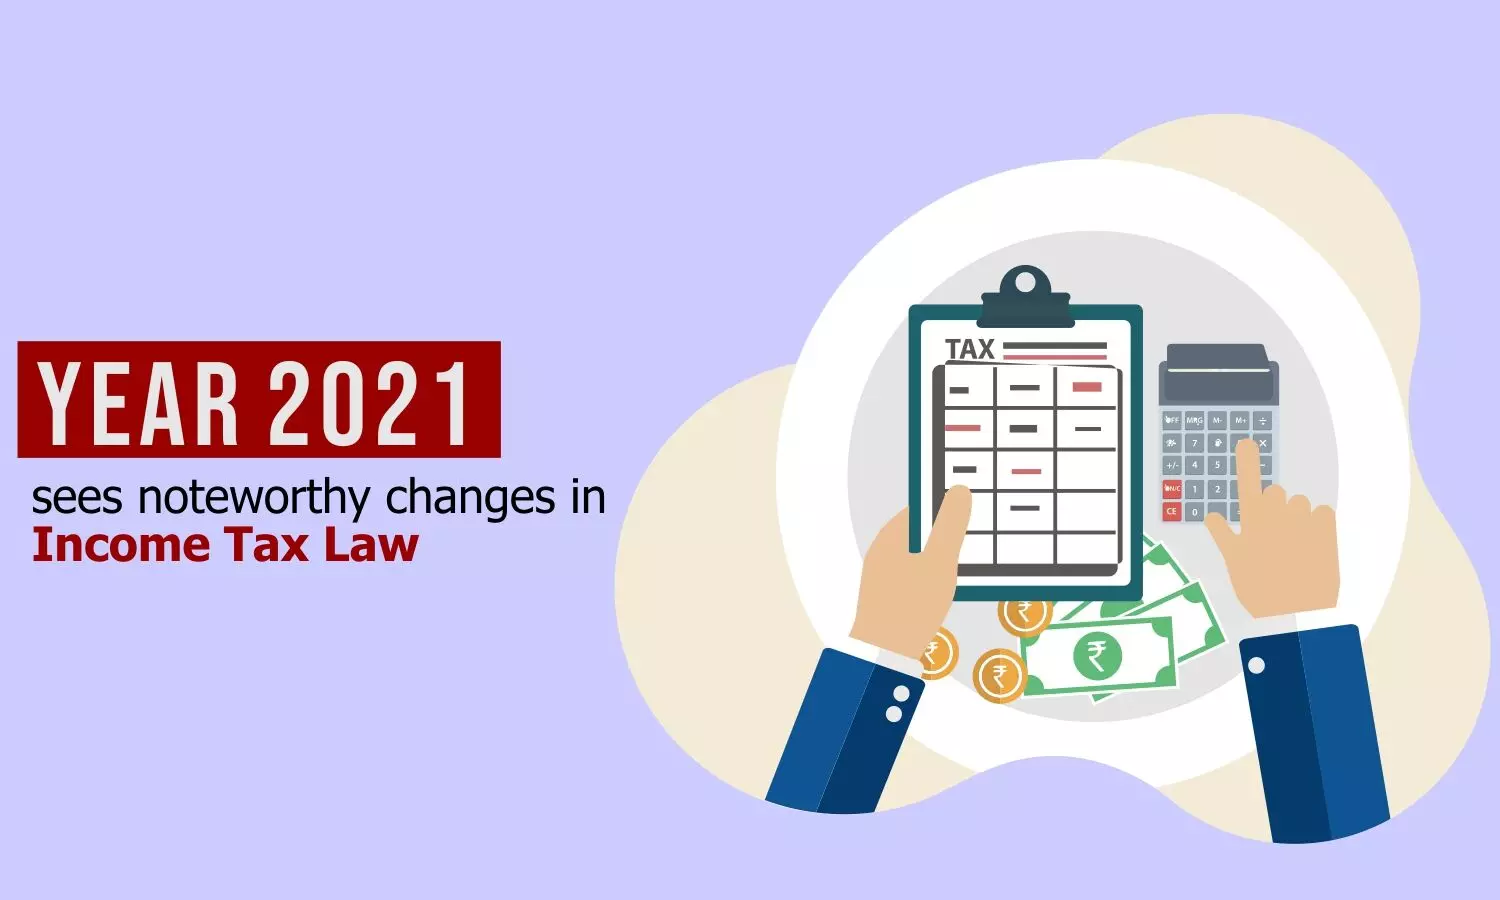 Year 2021 sees noteworthy changes in Income Tax Law